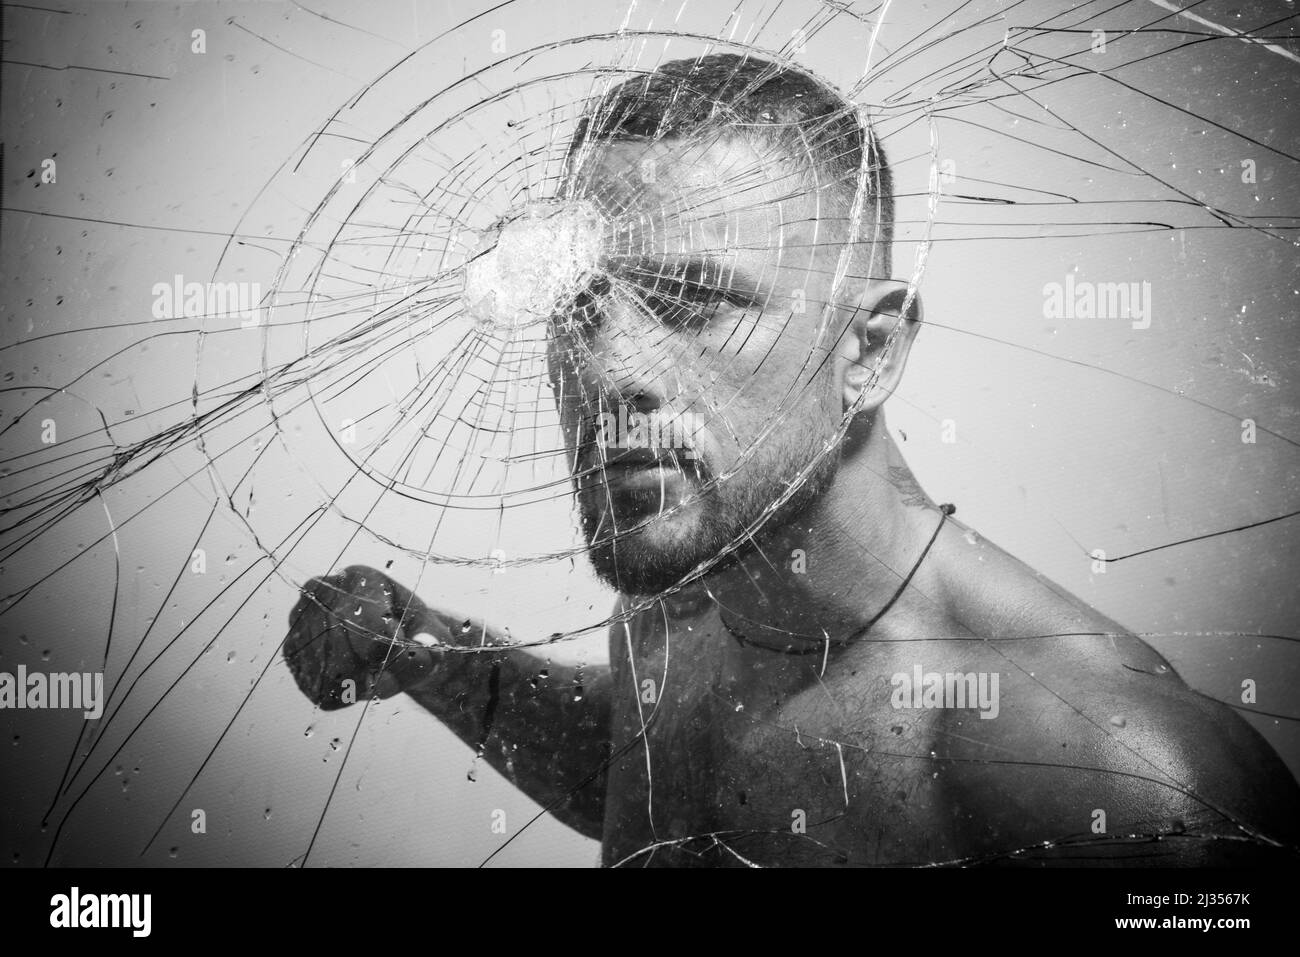 Gangster man, cracked glass. Ready to fight. Man boxing, strength and power. Hispanic gang man, south american latin, criminal guy with serious face. Stock Photo